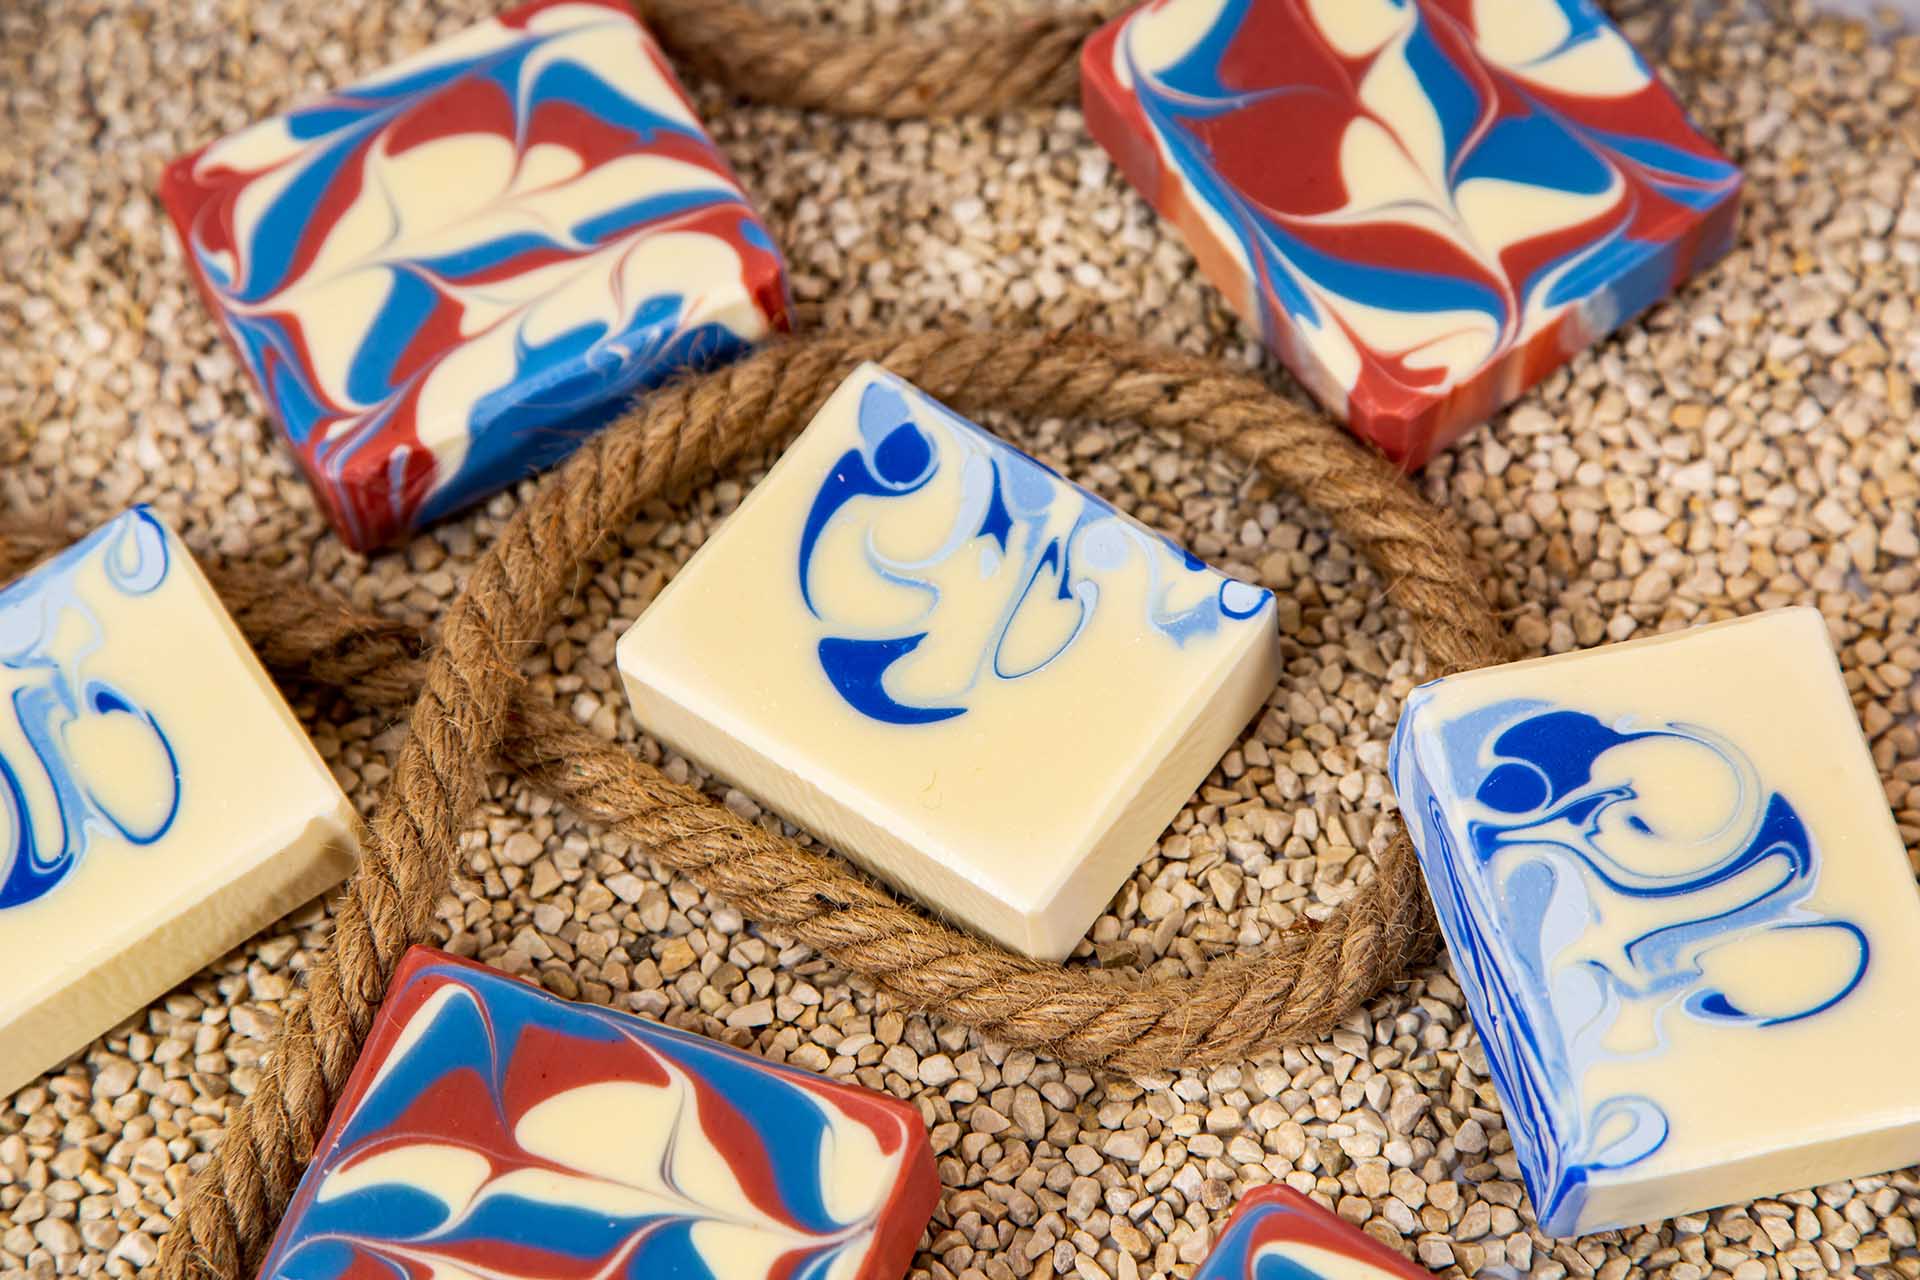 8 Soap Making Myths – Busted! Soapmaking 